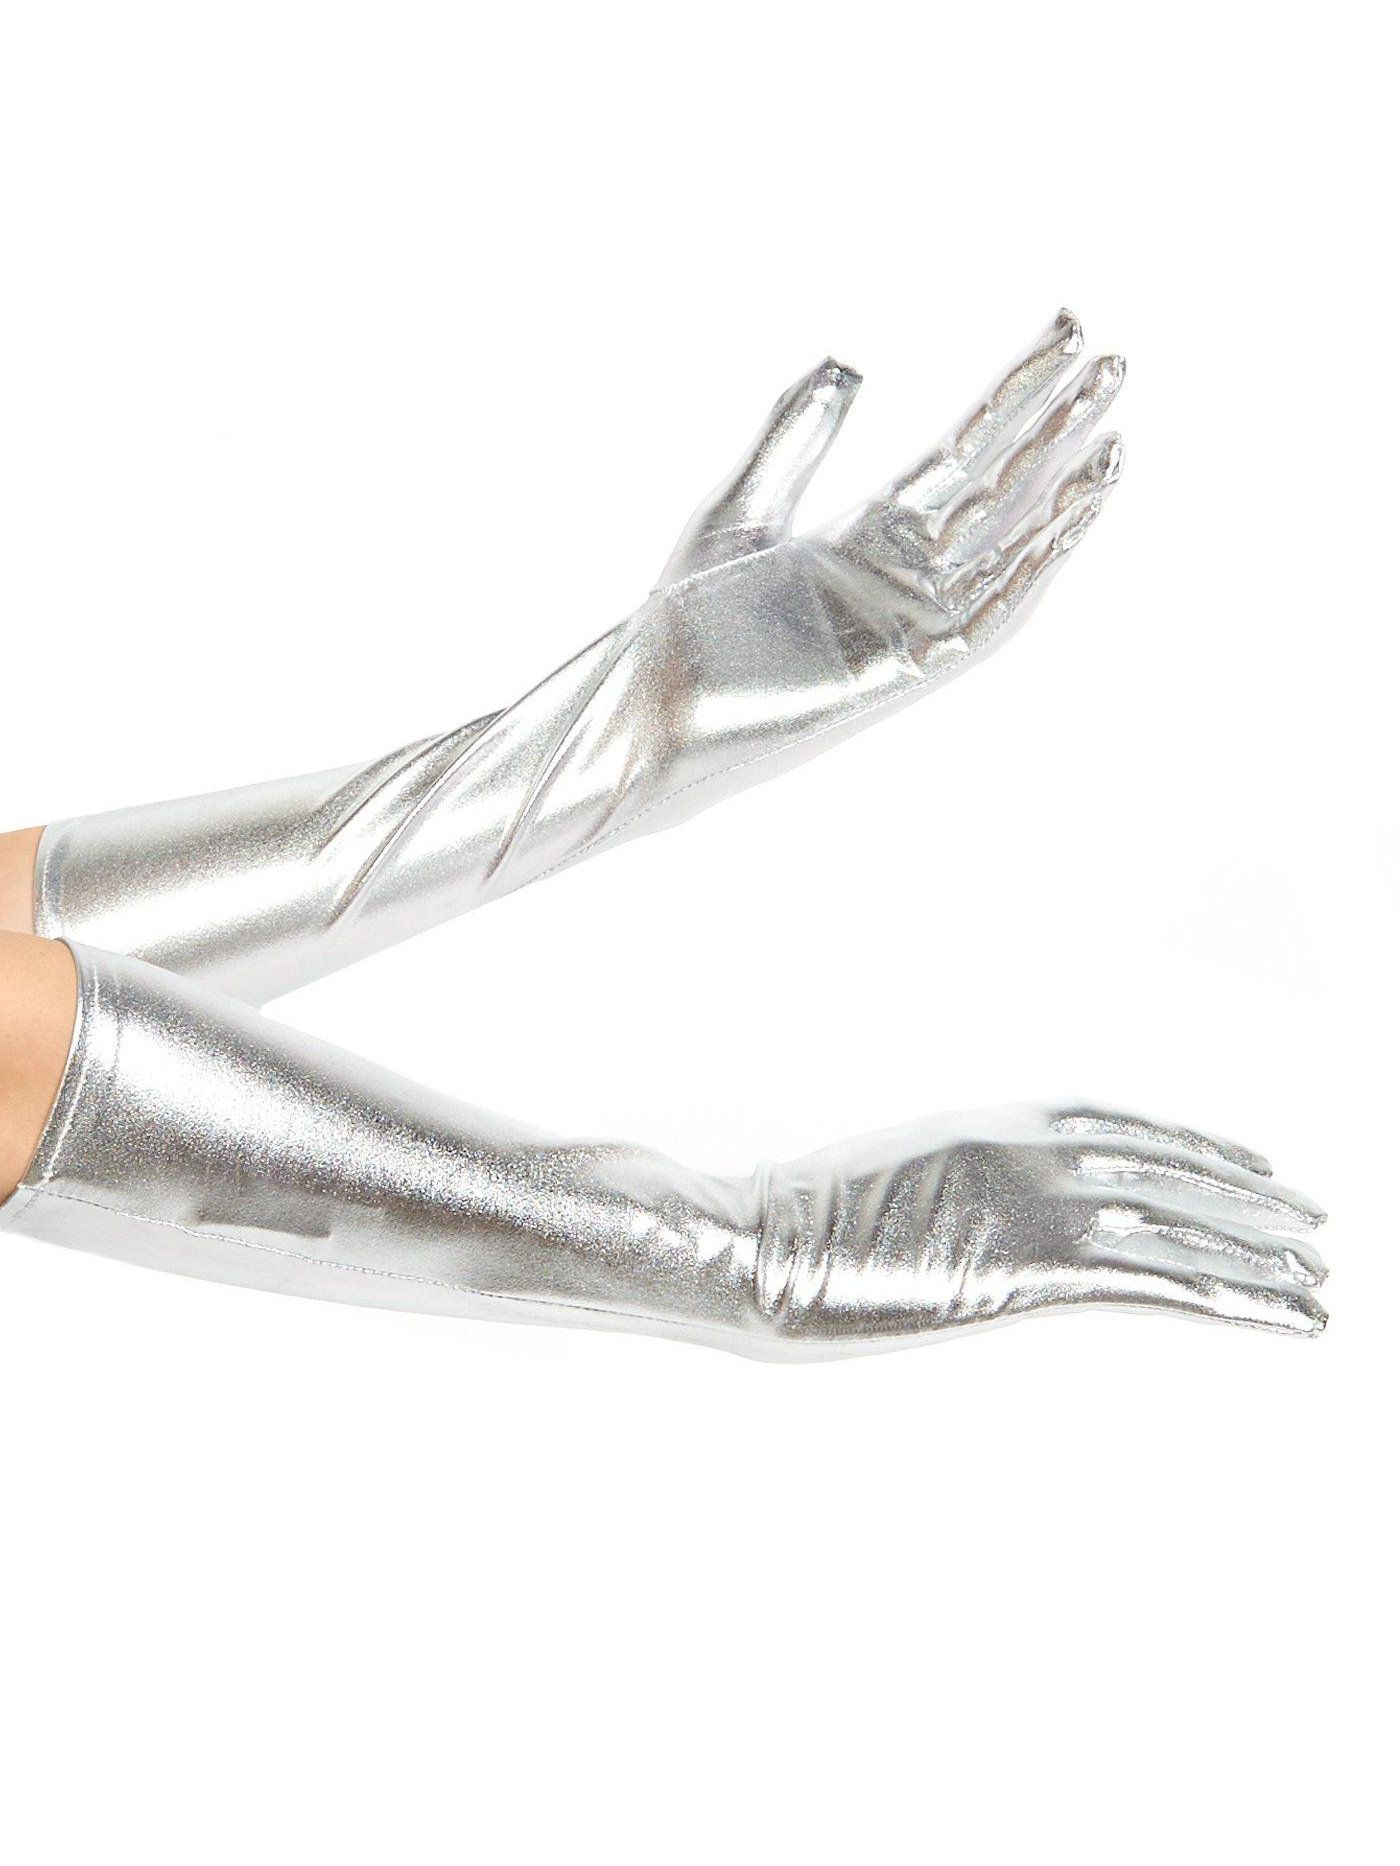 Silver Gloves - costumes.com